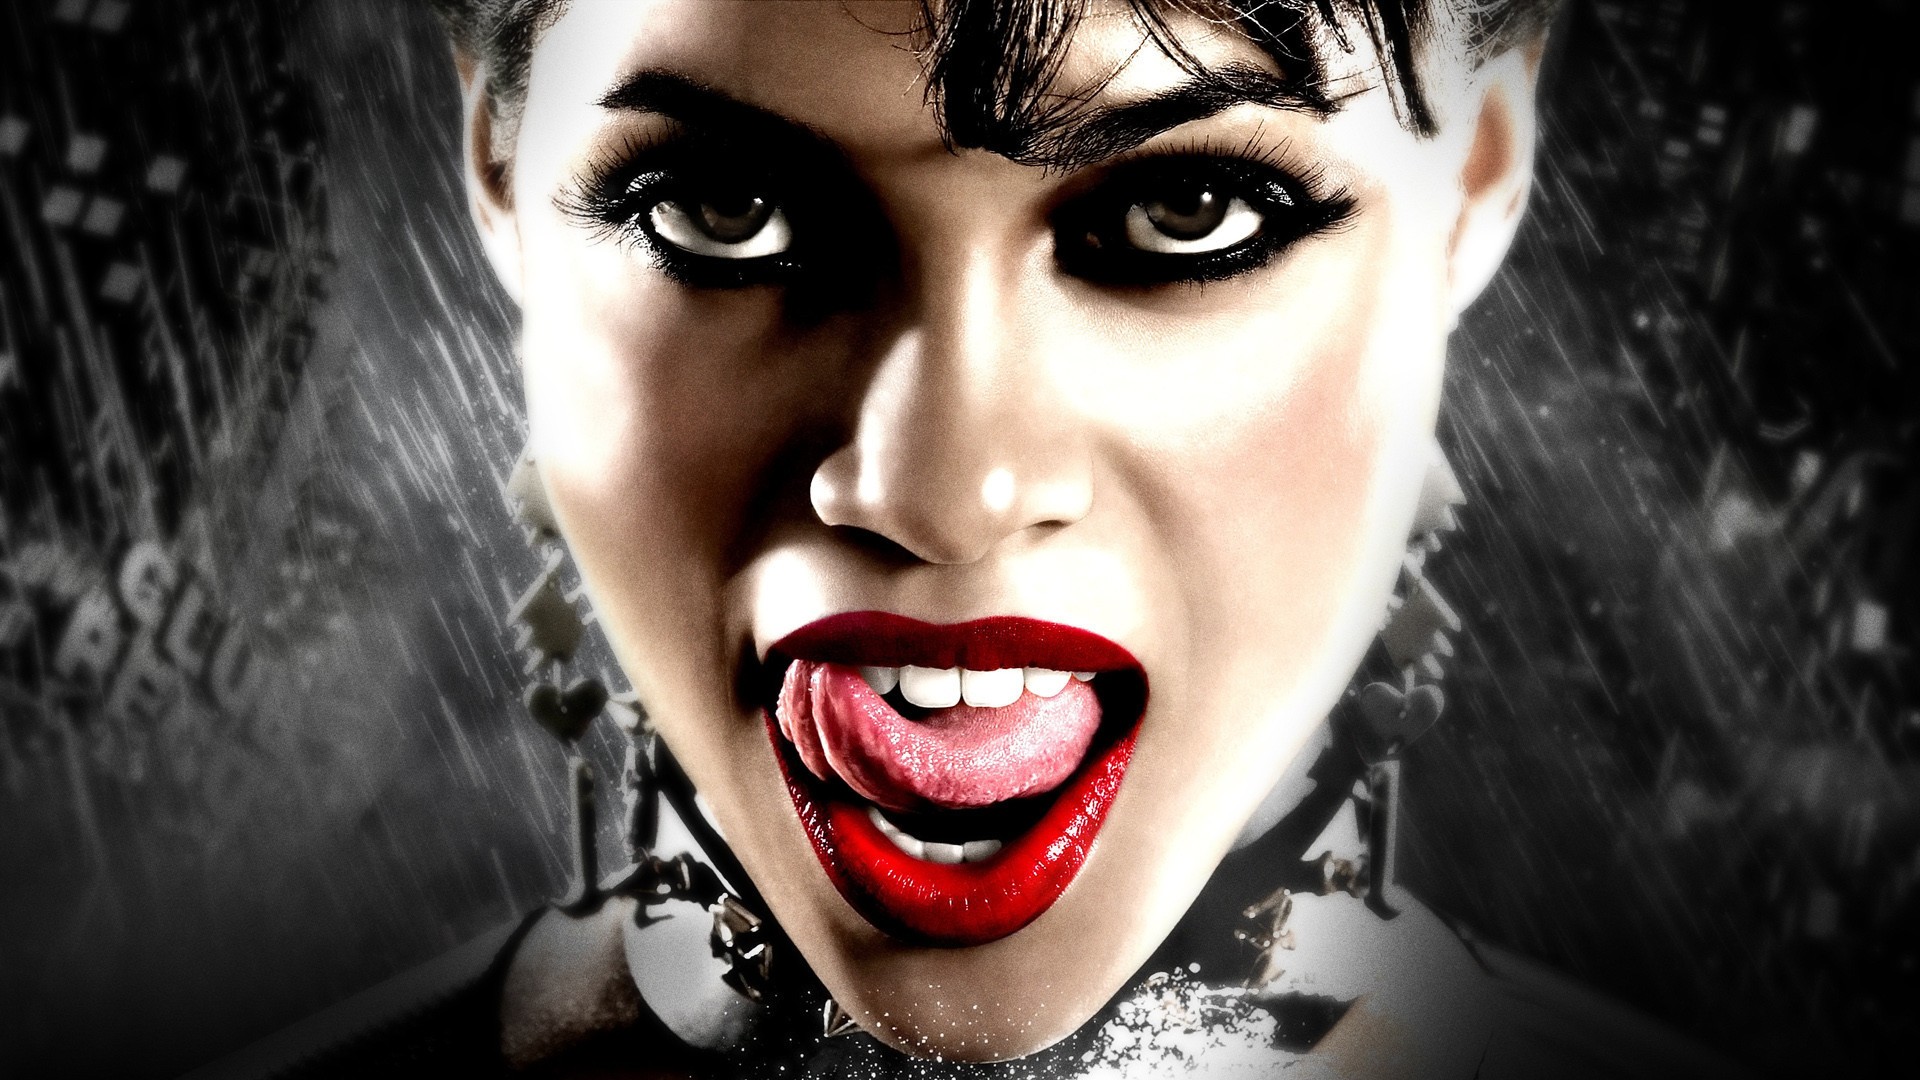 People 1920x1080 Sin City Rosario Dawson red lipstick actress movies face closeup tongues tongue out women movie poster dark eyes